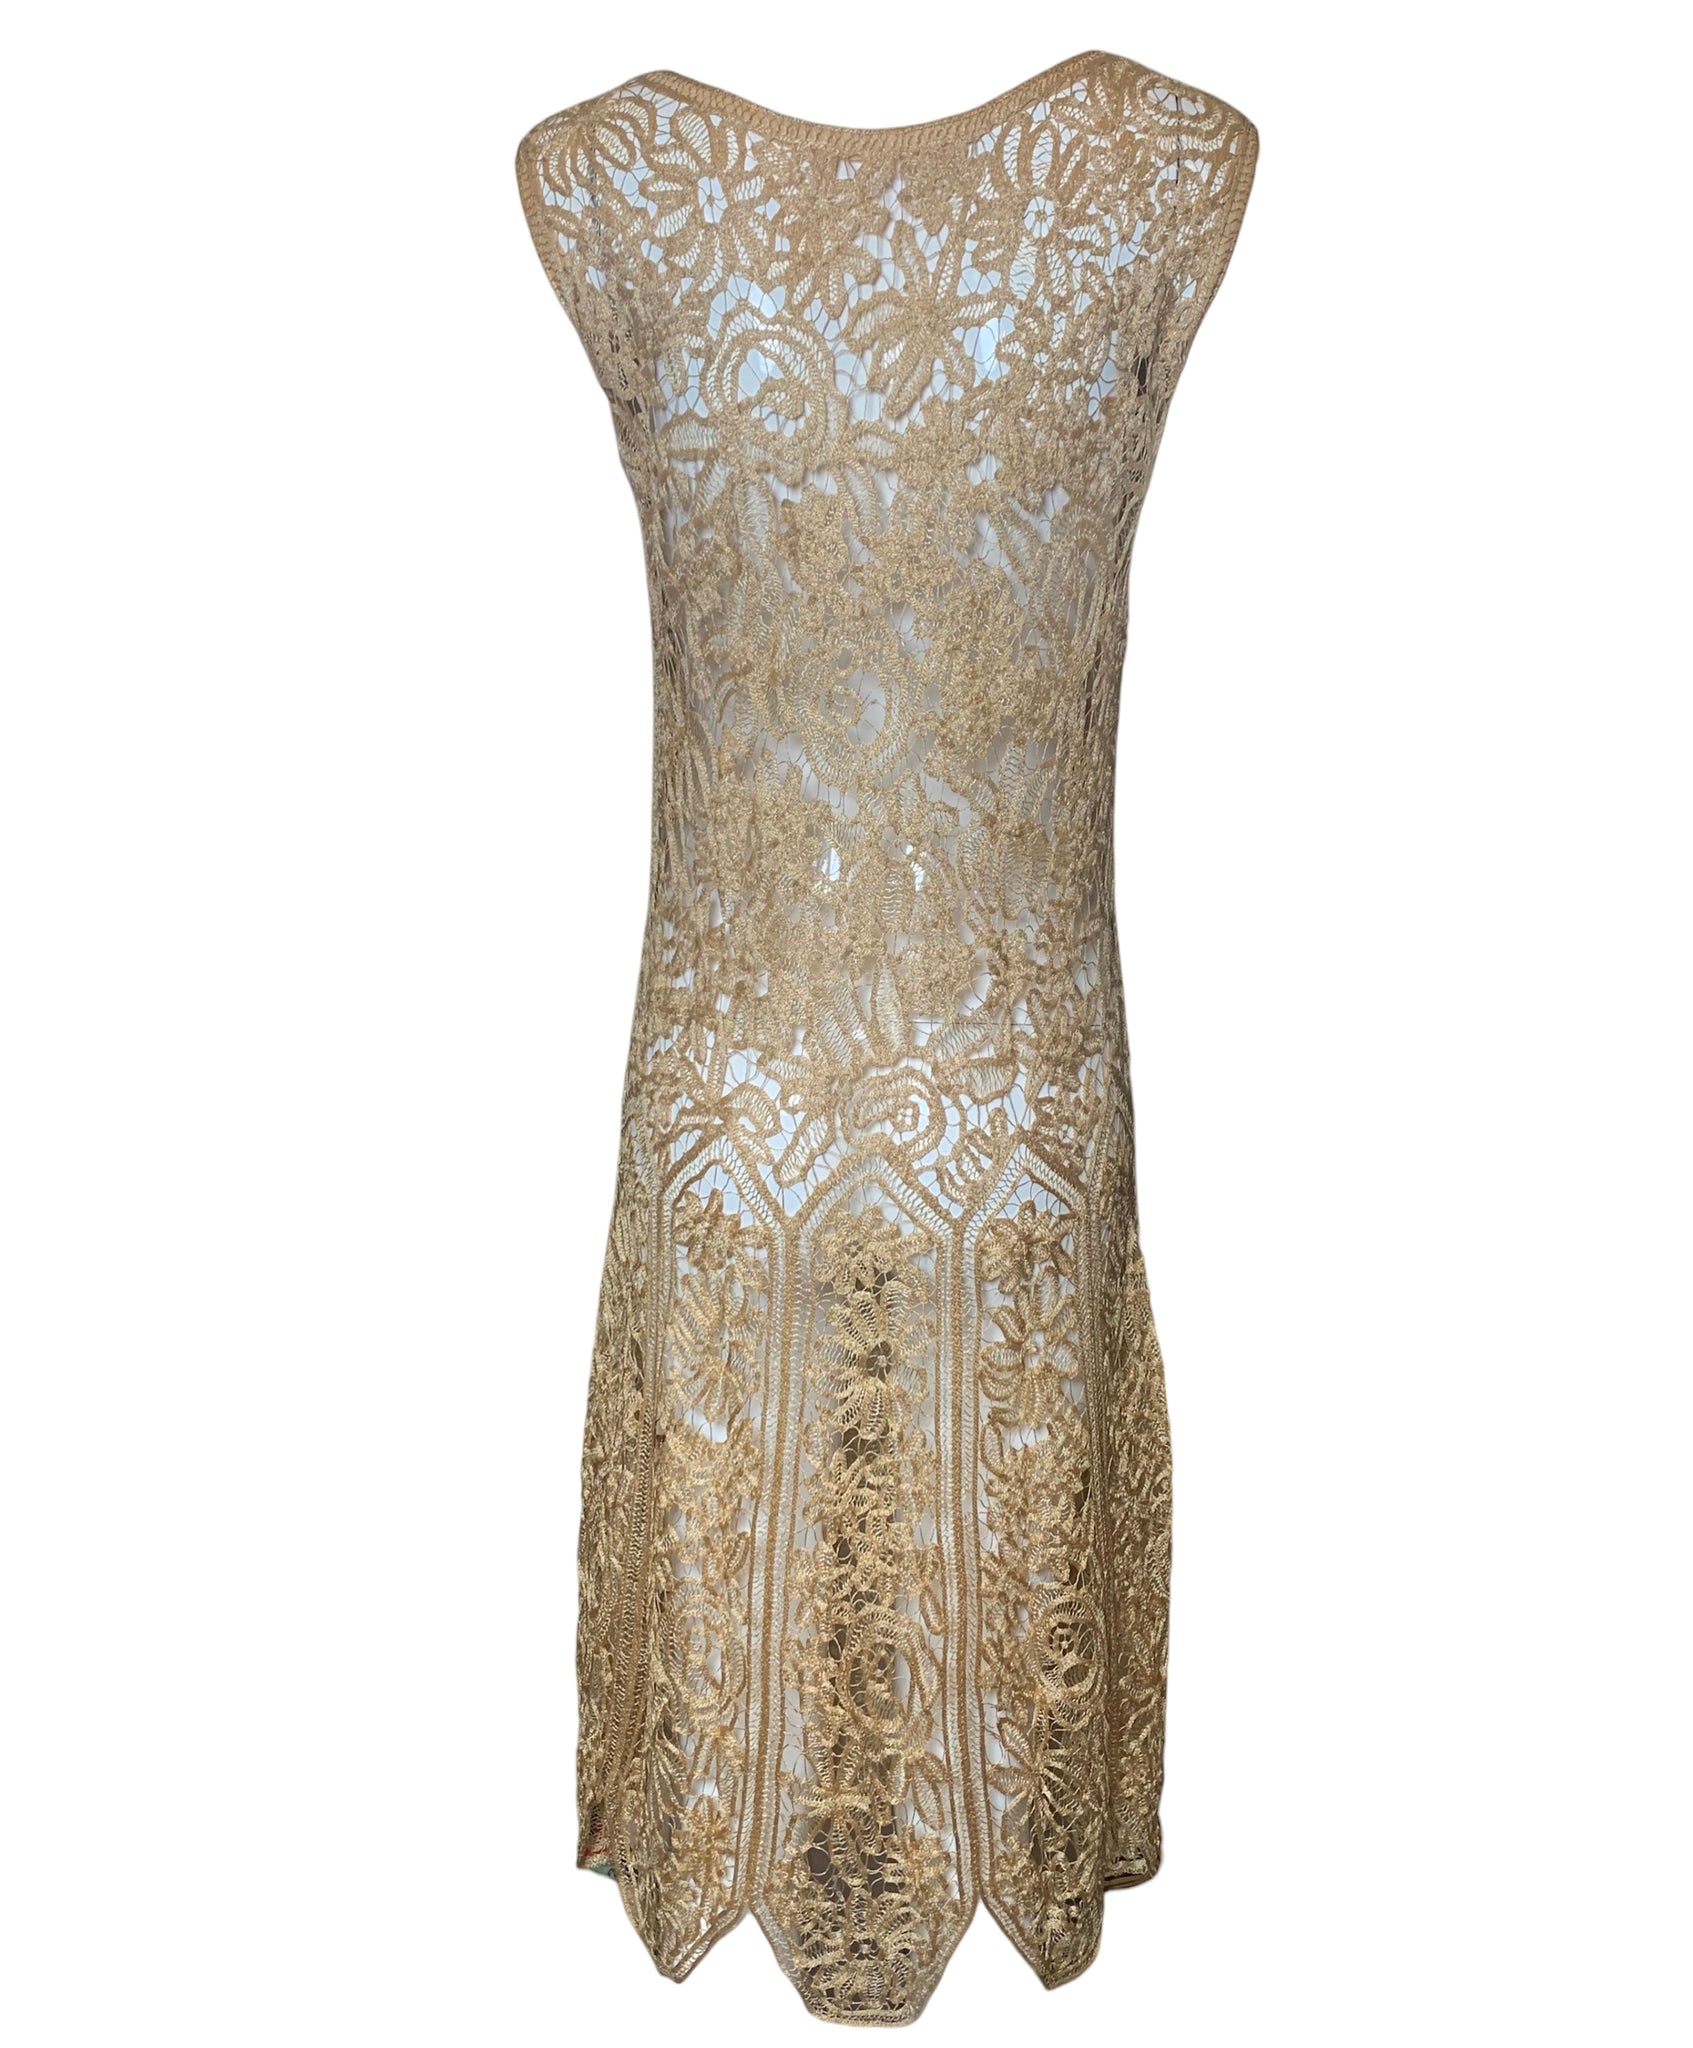  20s Handmade Nude Lace Crochet  Day Dress with Scalloped Hem BACK 3 of 5